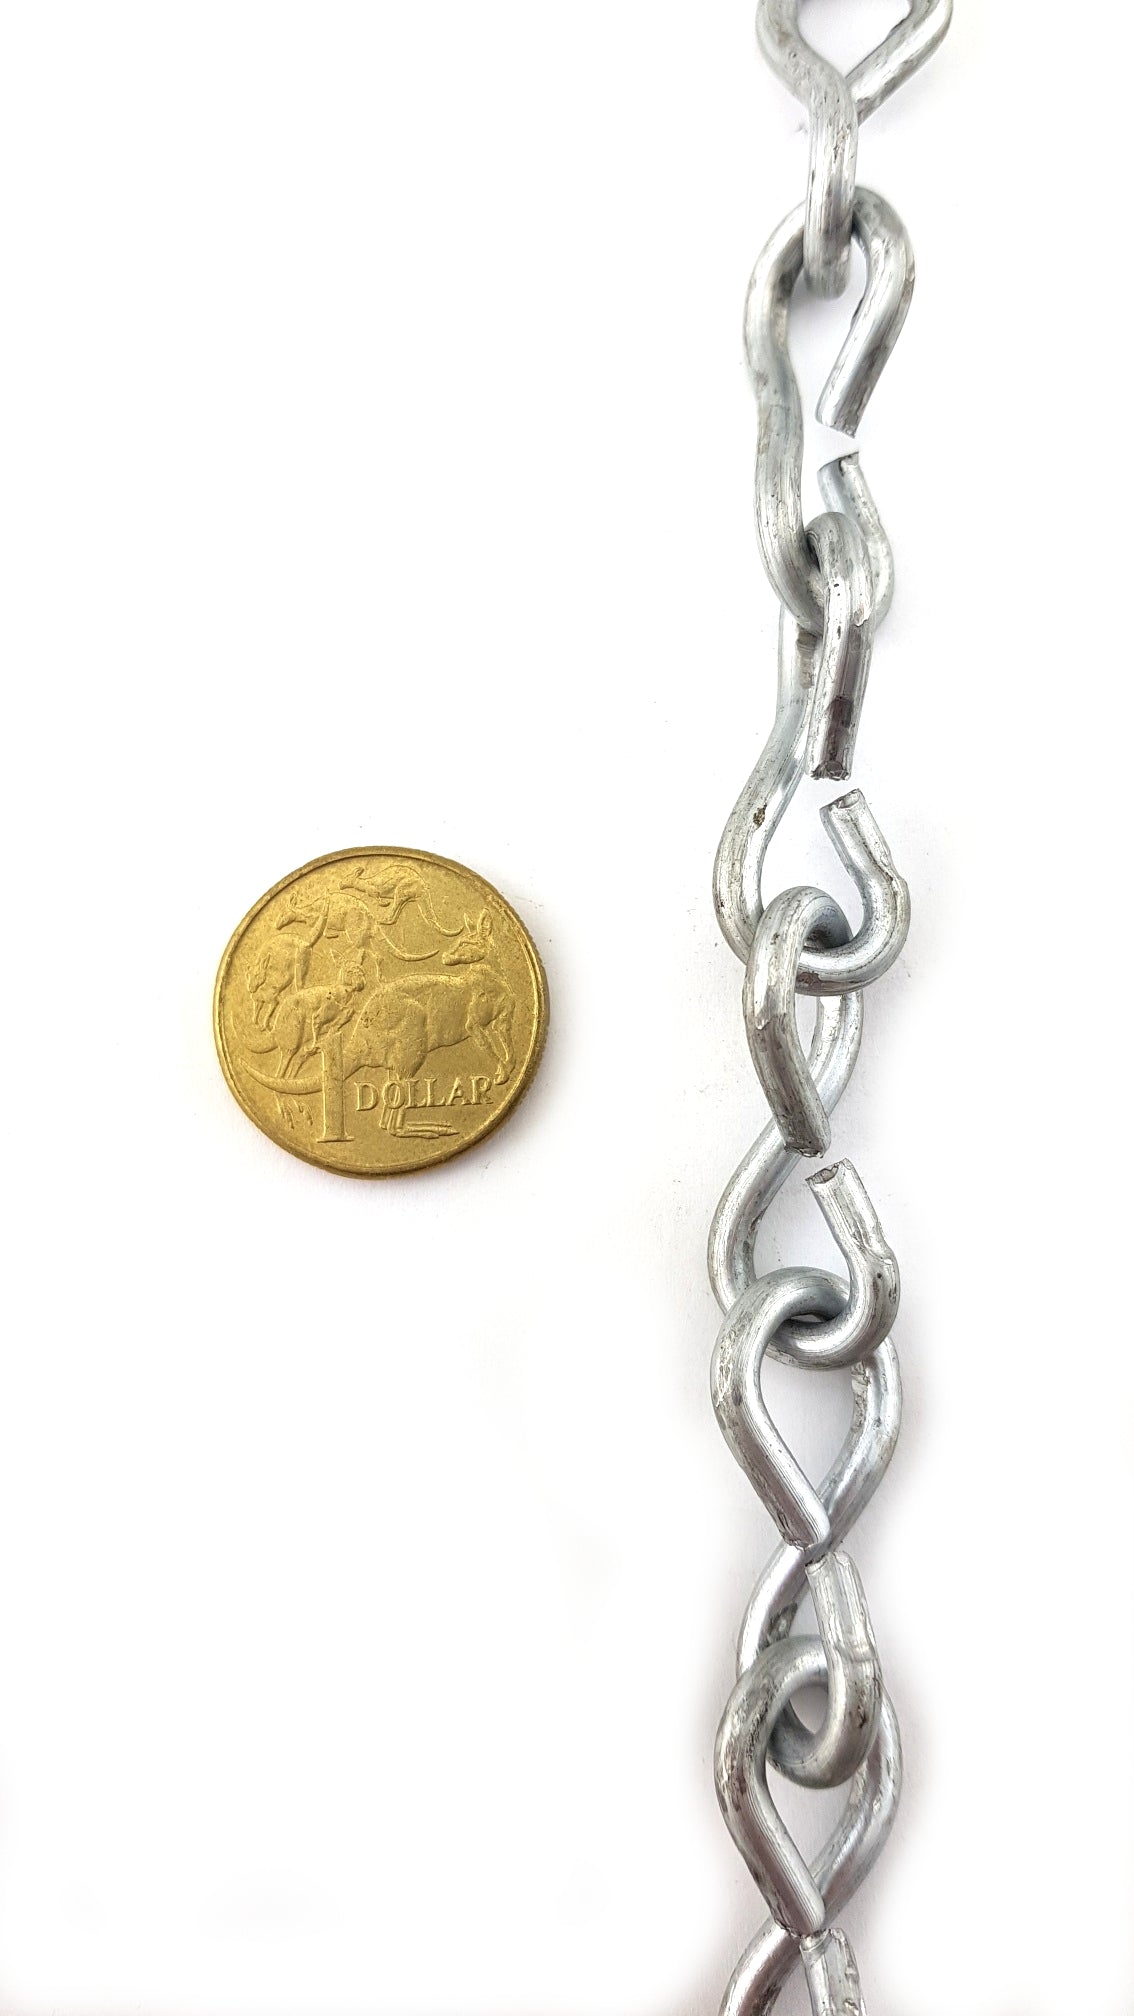 Australian made Single Jack Chain in galvanised finish, size 3.15mm and quantity of 100 metres. Melbourne, Australia.